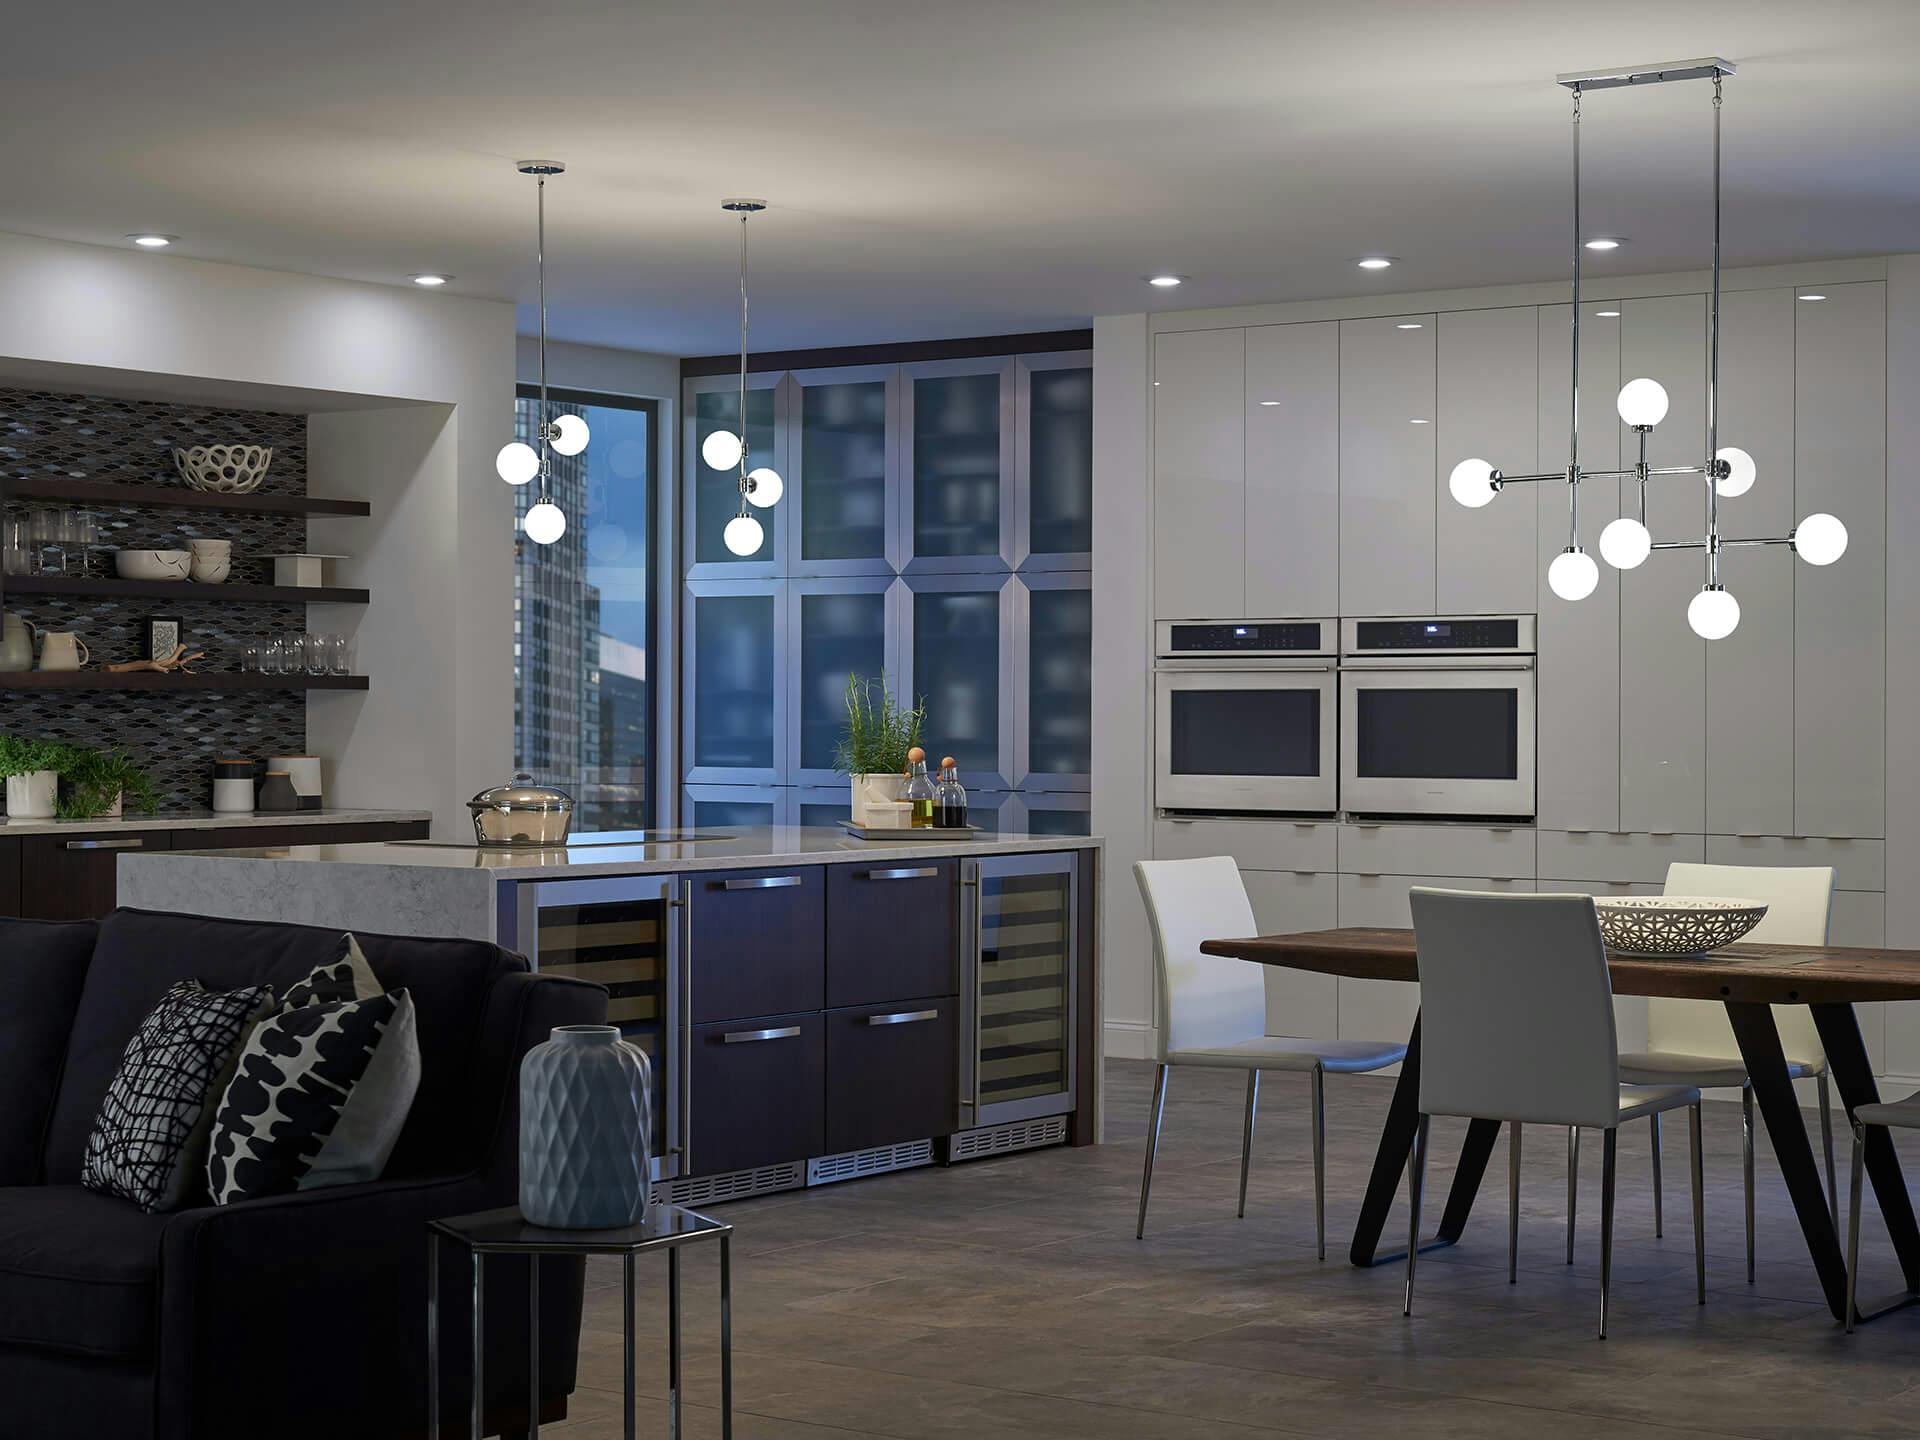 High rise open concept apartment at night with Aura chandelier and pendant lights hanging over a dining table and kitchen island